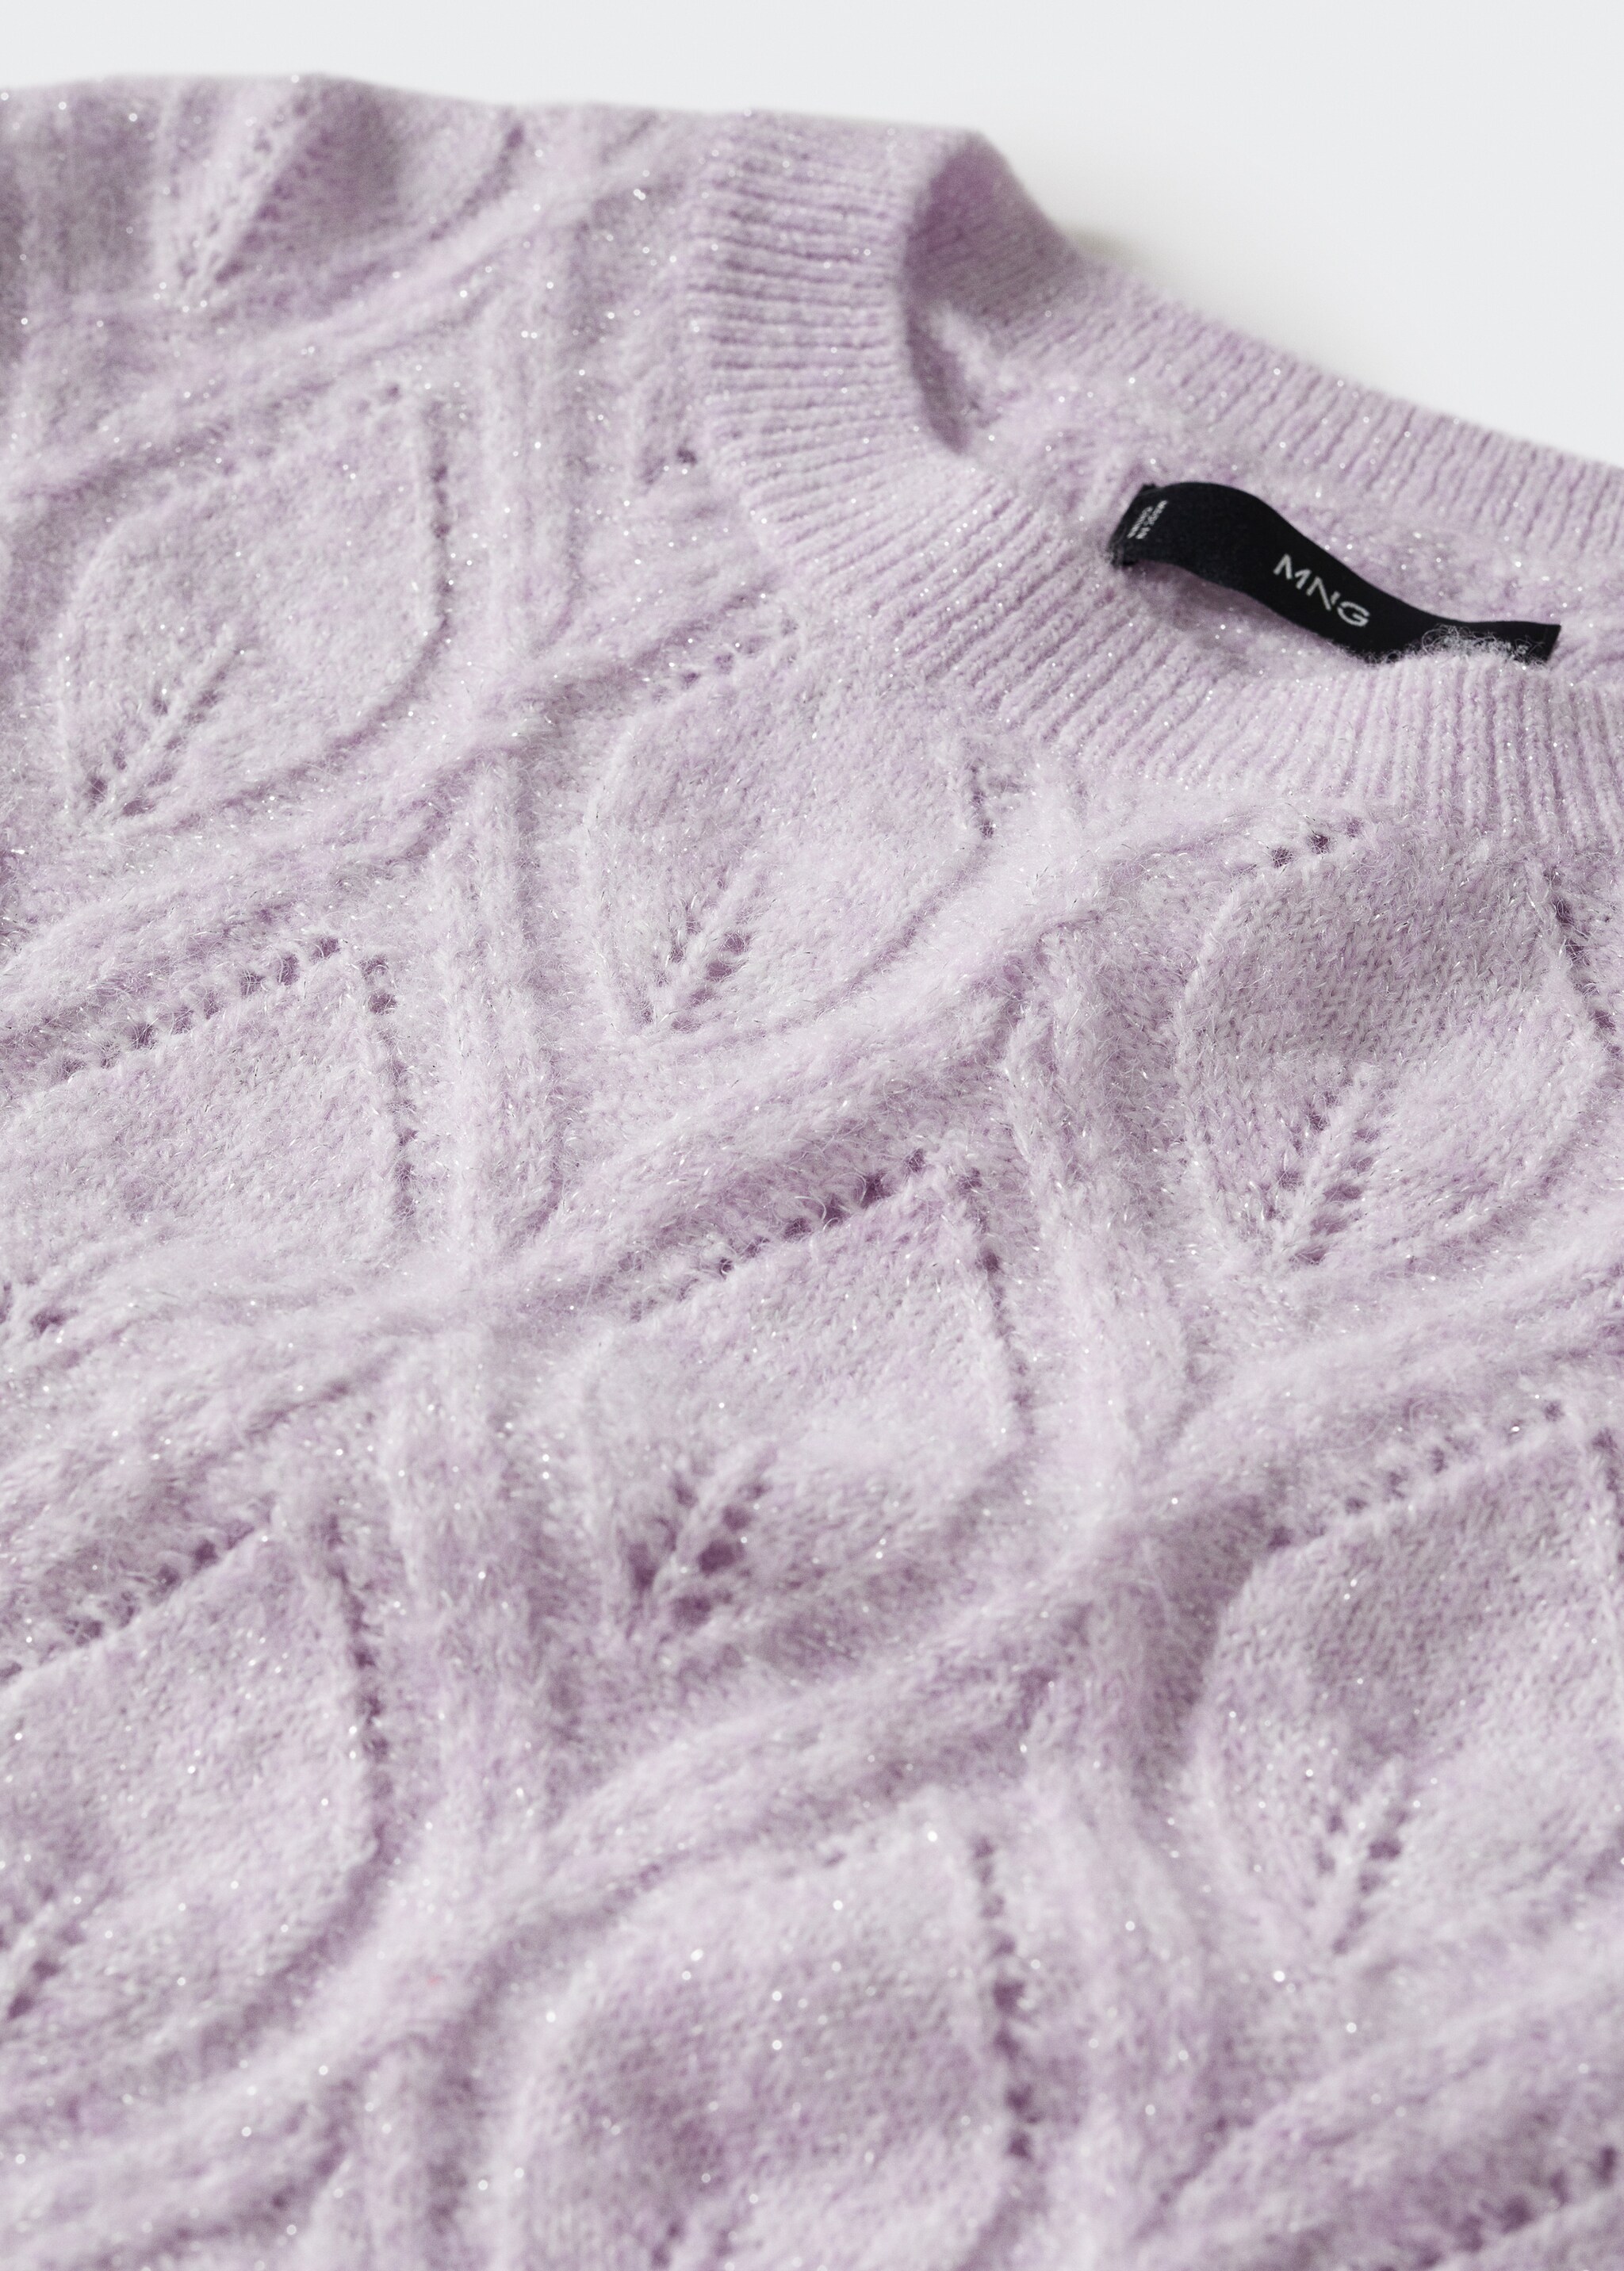 Open-knit sweater - Details of the article 8